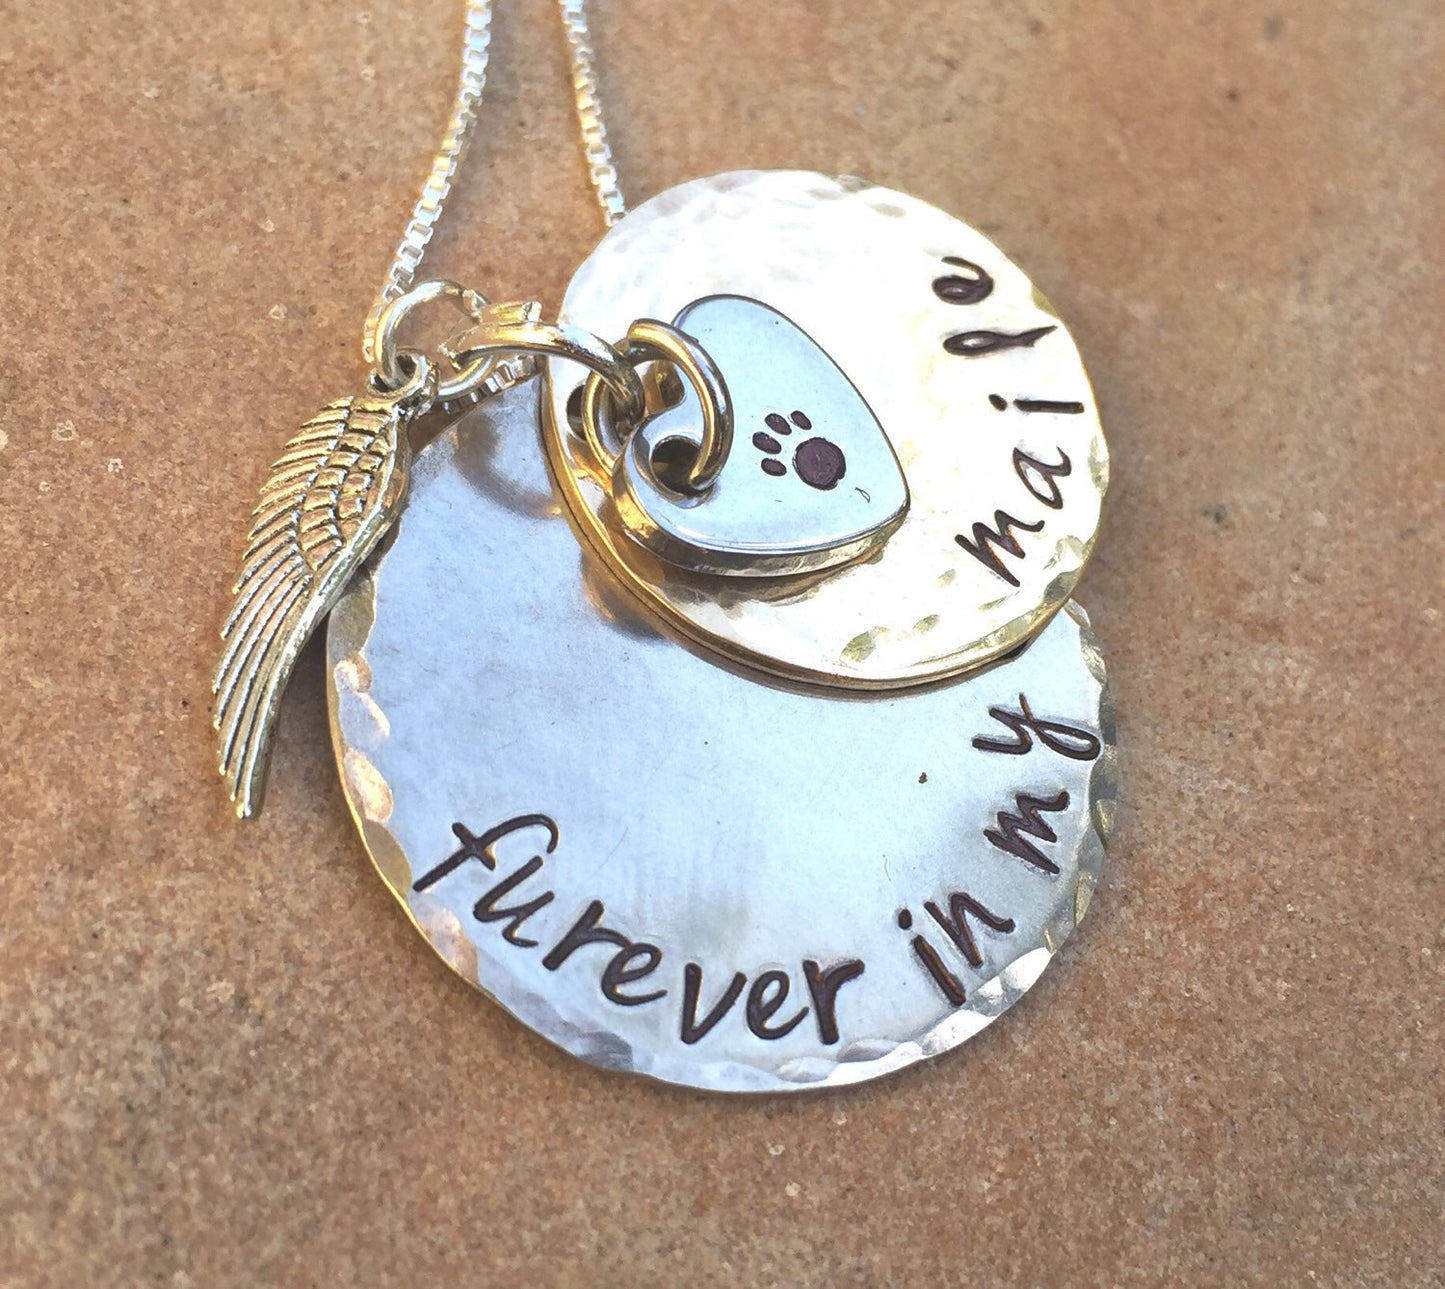 Pet Memorial Necklace - Natashaaloha, jewelry, bracelets, necklace, keychains, fishing lures, gifts for men, charms, personalized, 